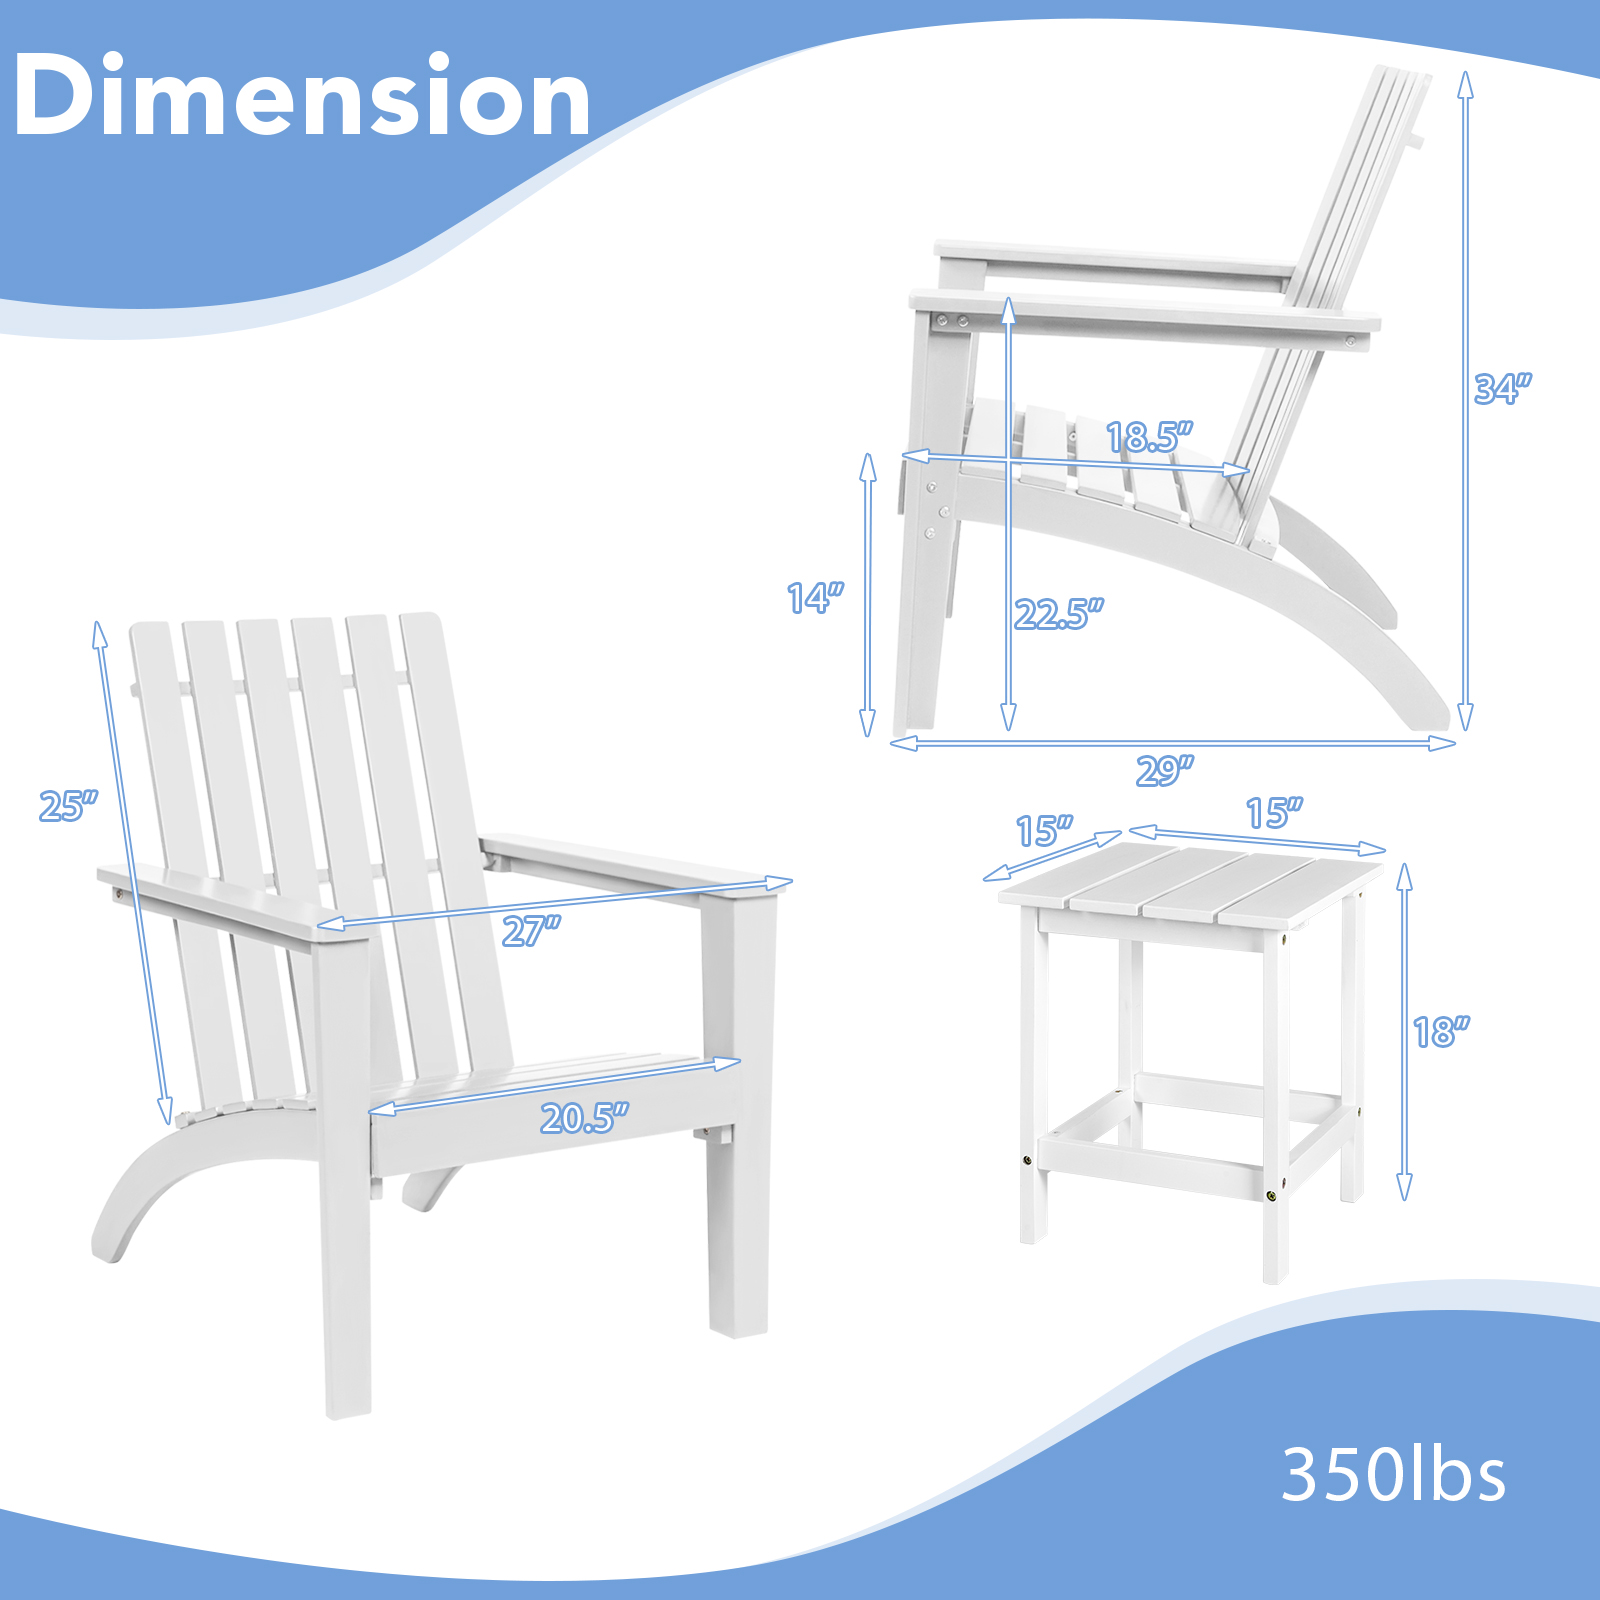 Patiojoy 3PCS Patio Adirondack Chair Side Table Set Solid Wood Garden Deck Bistro Set Classic Furniture Chair Set White - image 4 of 10